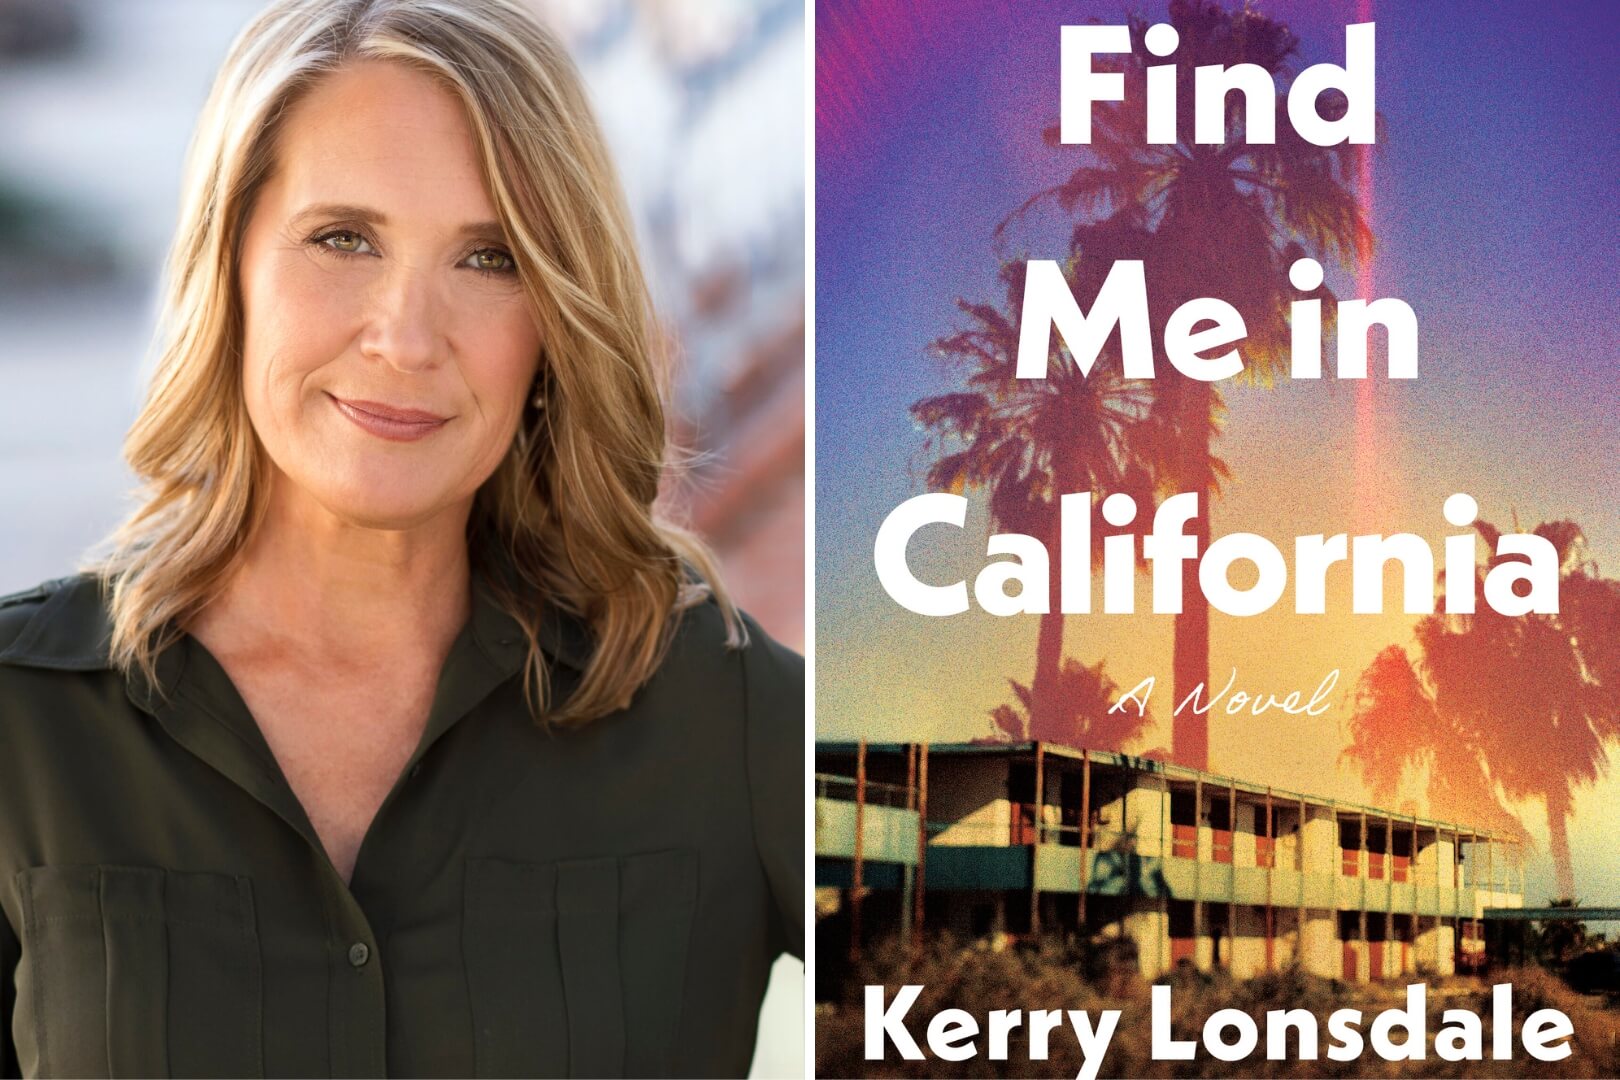 Q&A with Kerry Lonsdale, Author of Find Me in California